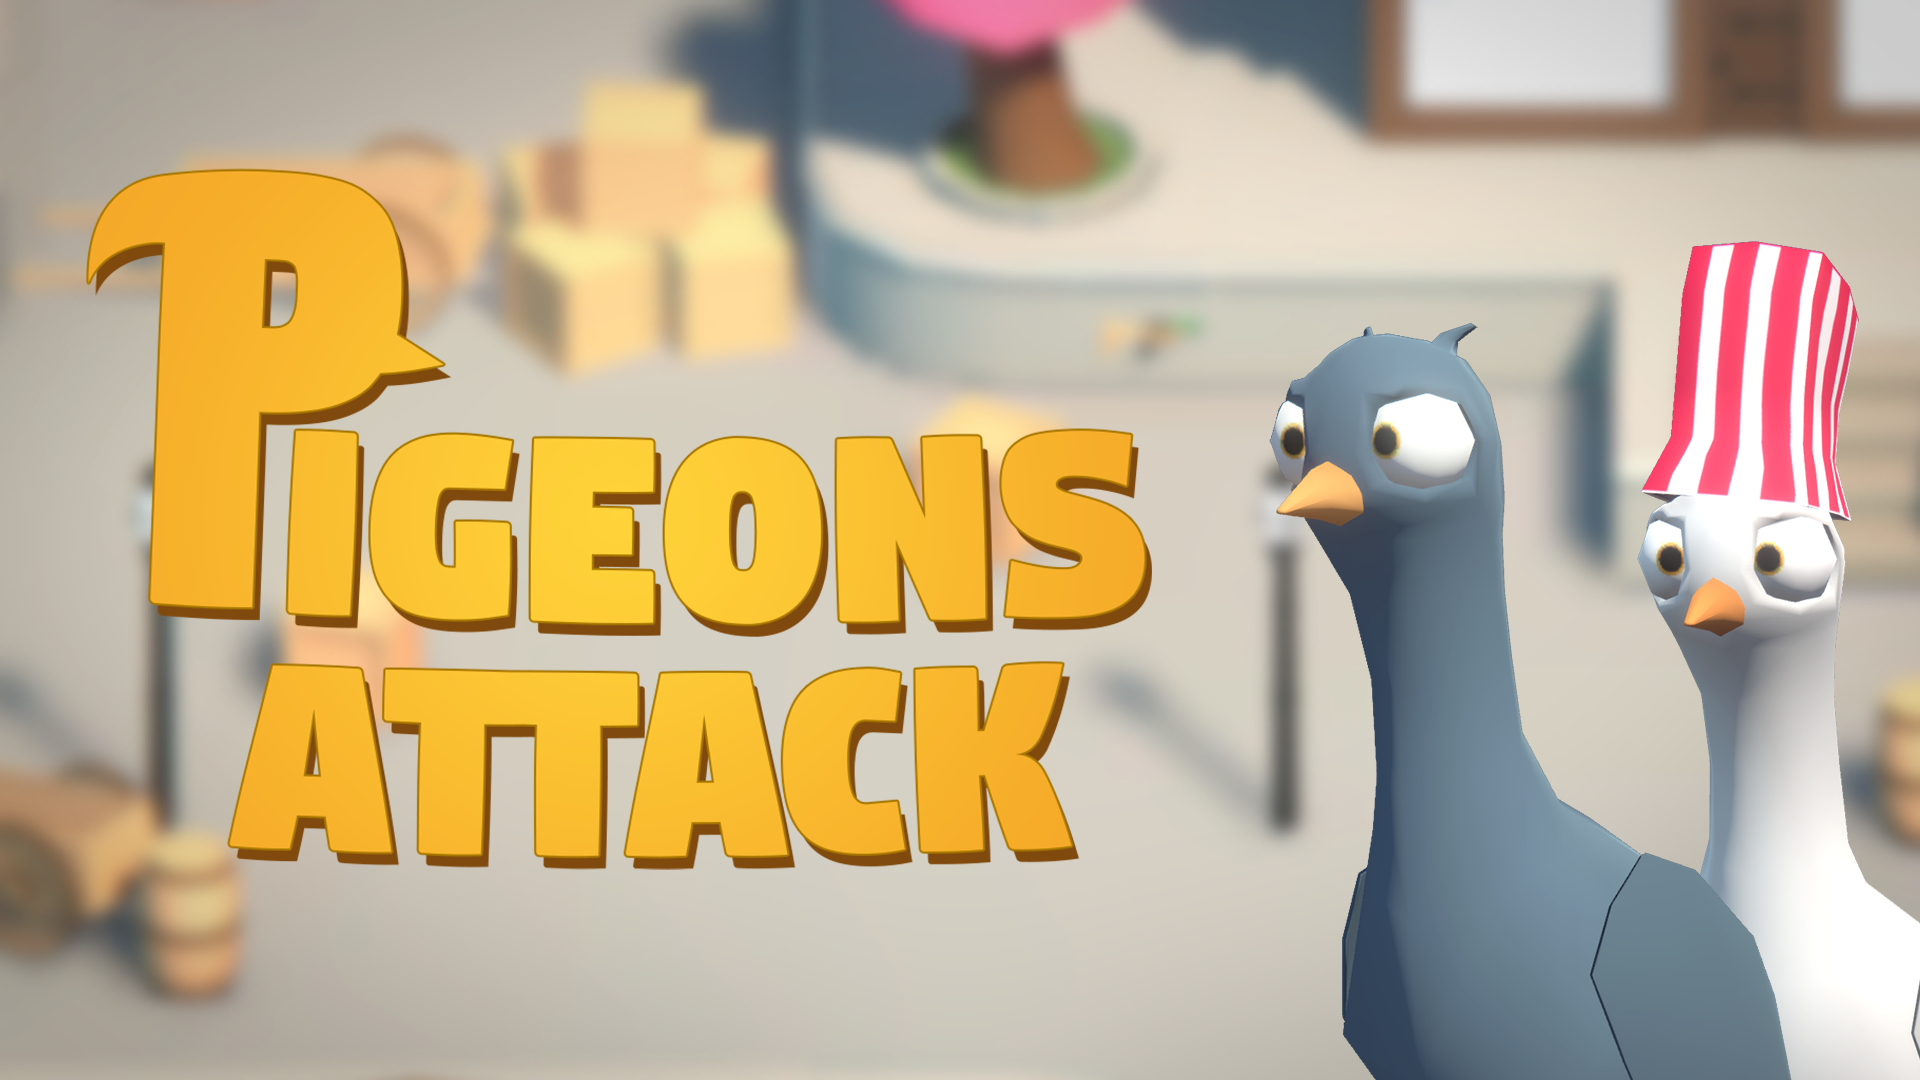 19-PigeonsAttack_Cover.png